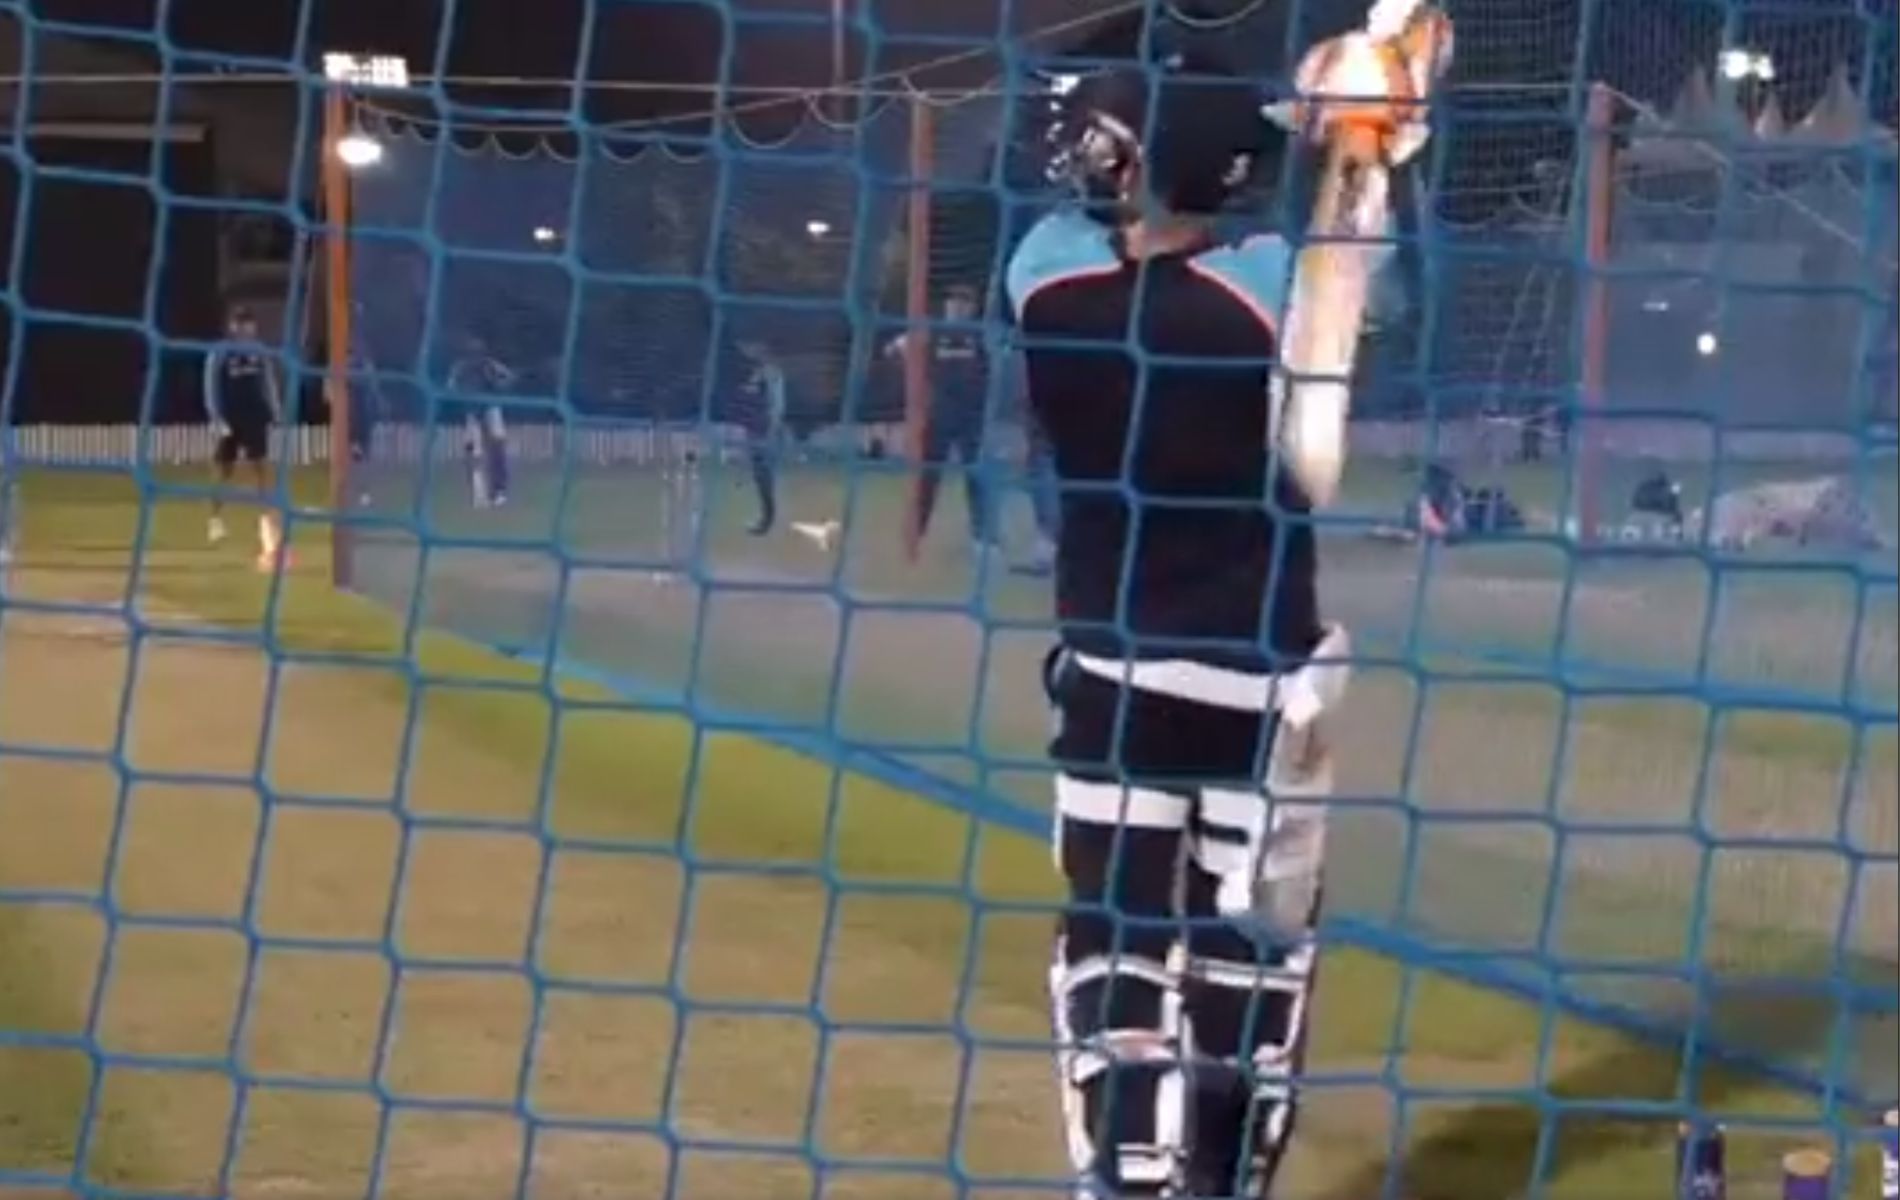 2021 T20 World Cup: Ravindra Jadeja was seen practicing some big shots in the nets for India ahead of their match against Afghanistan